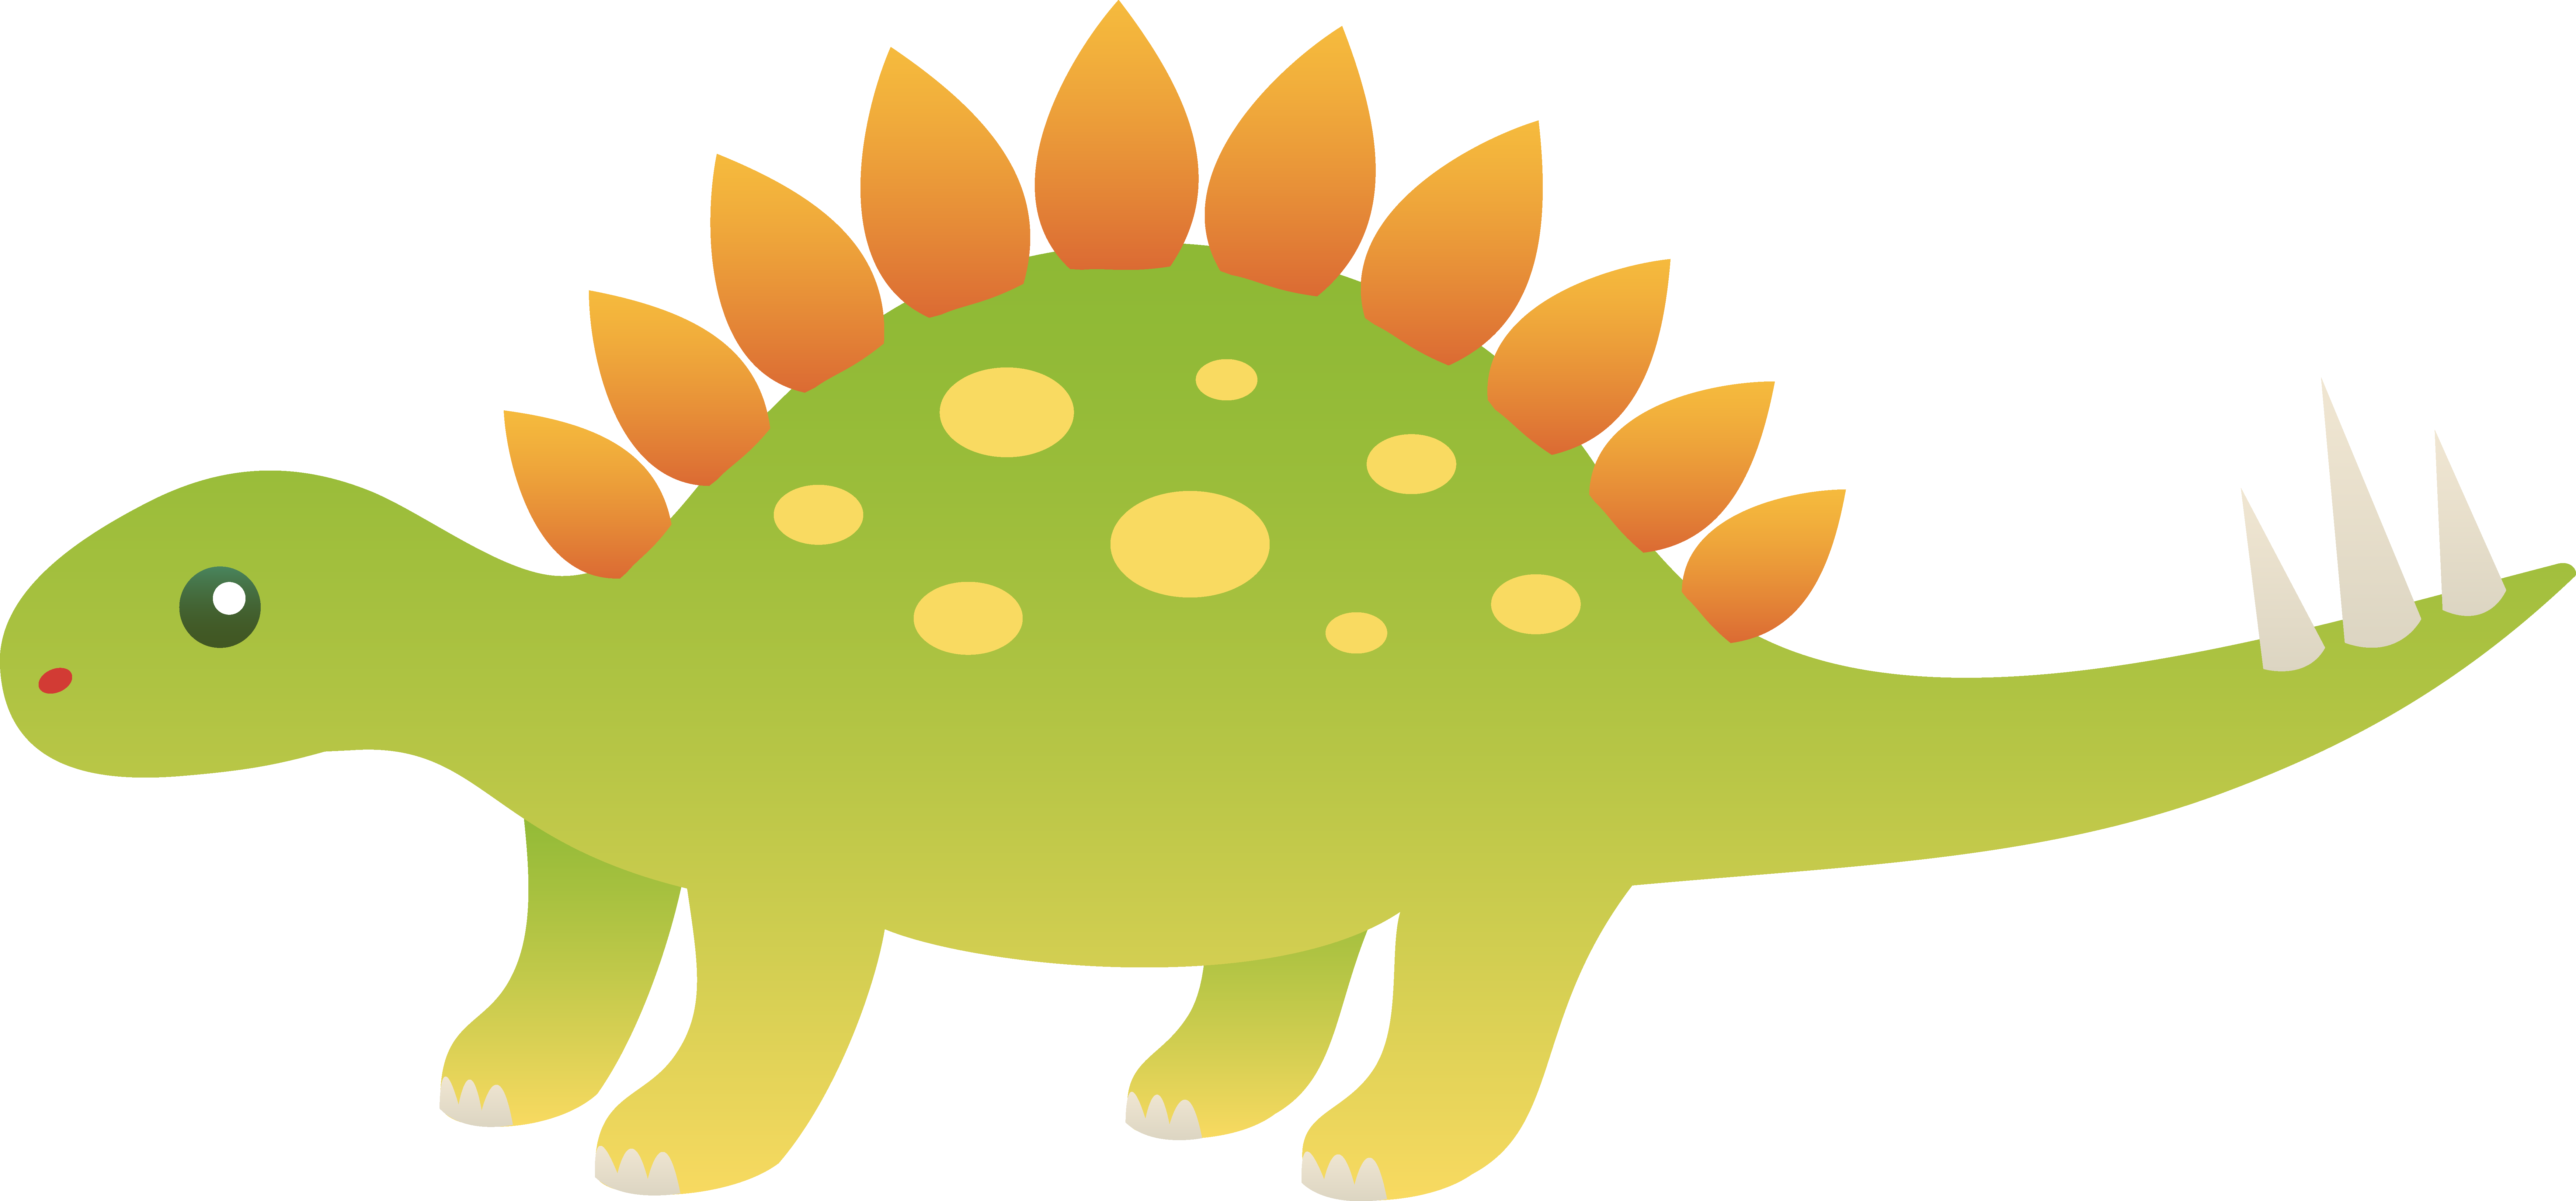 Dinosaur Border Clip Art Images  Pictures - Becuo